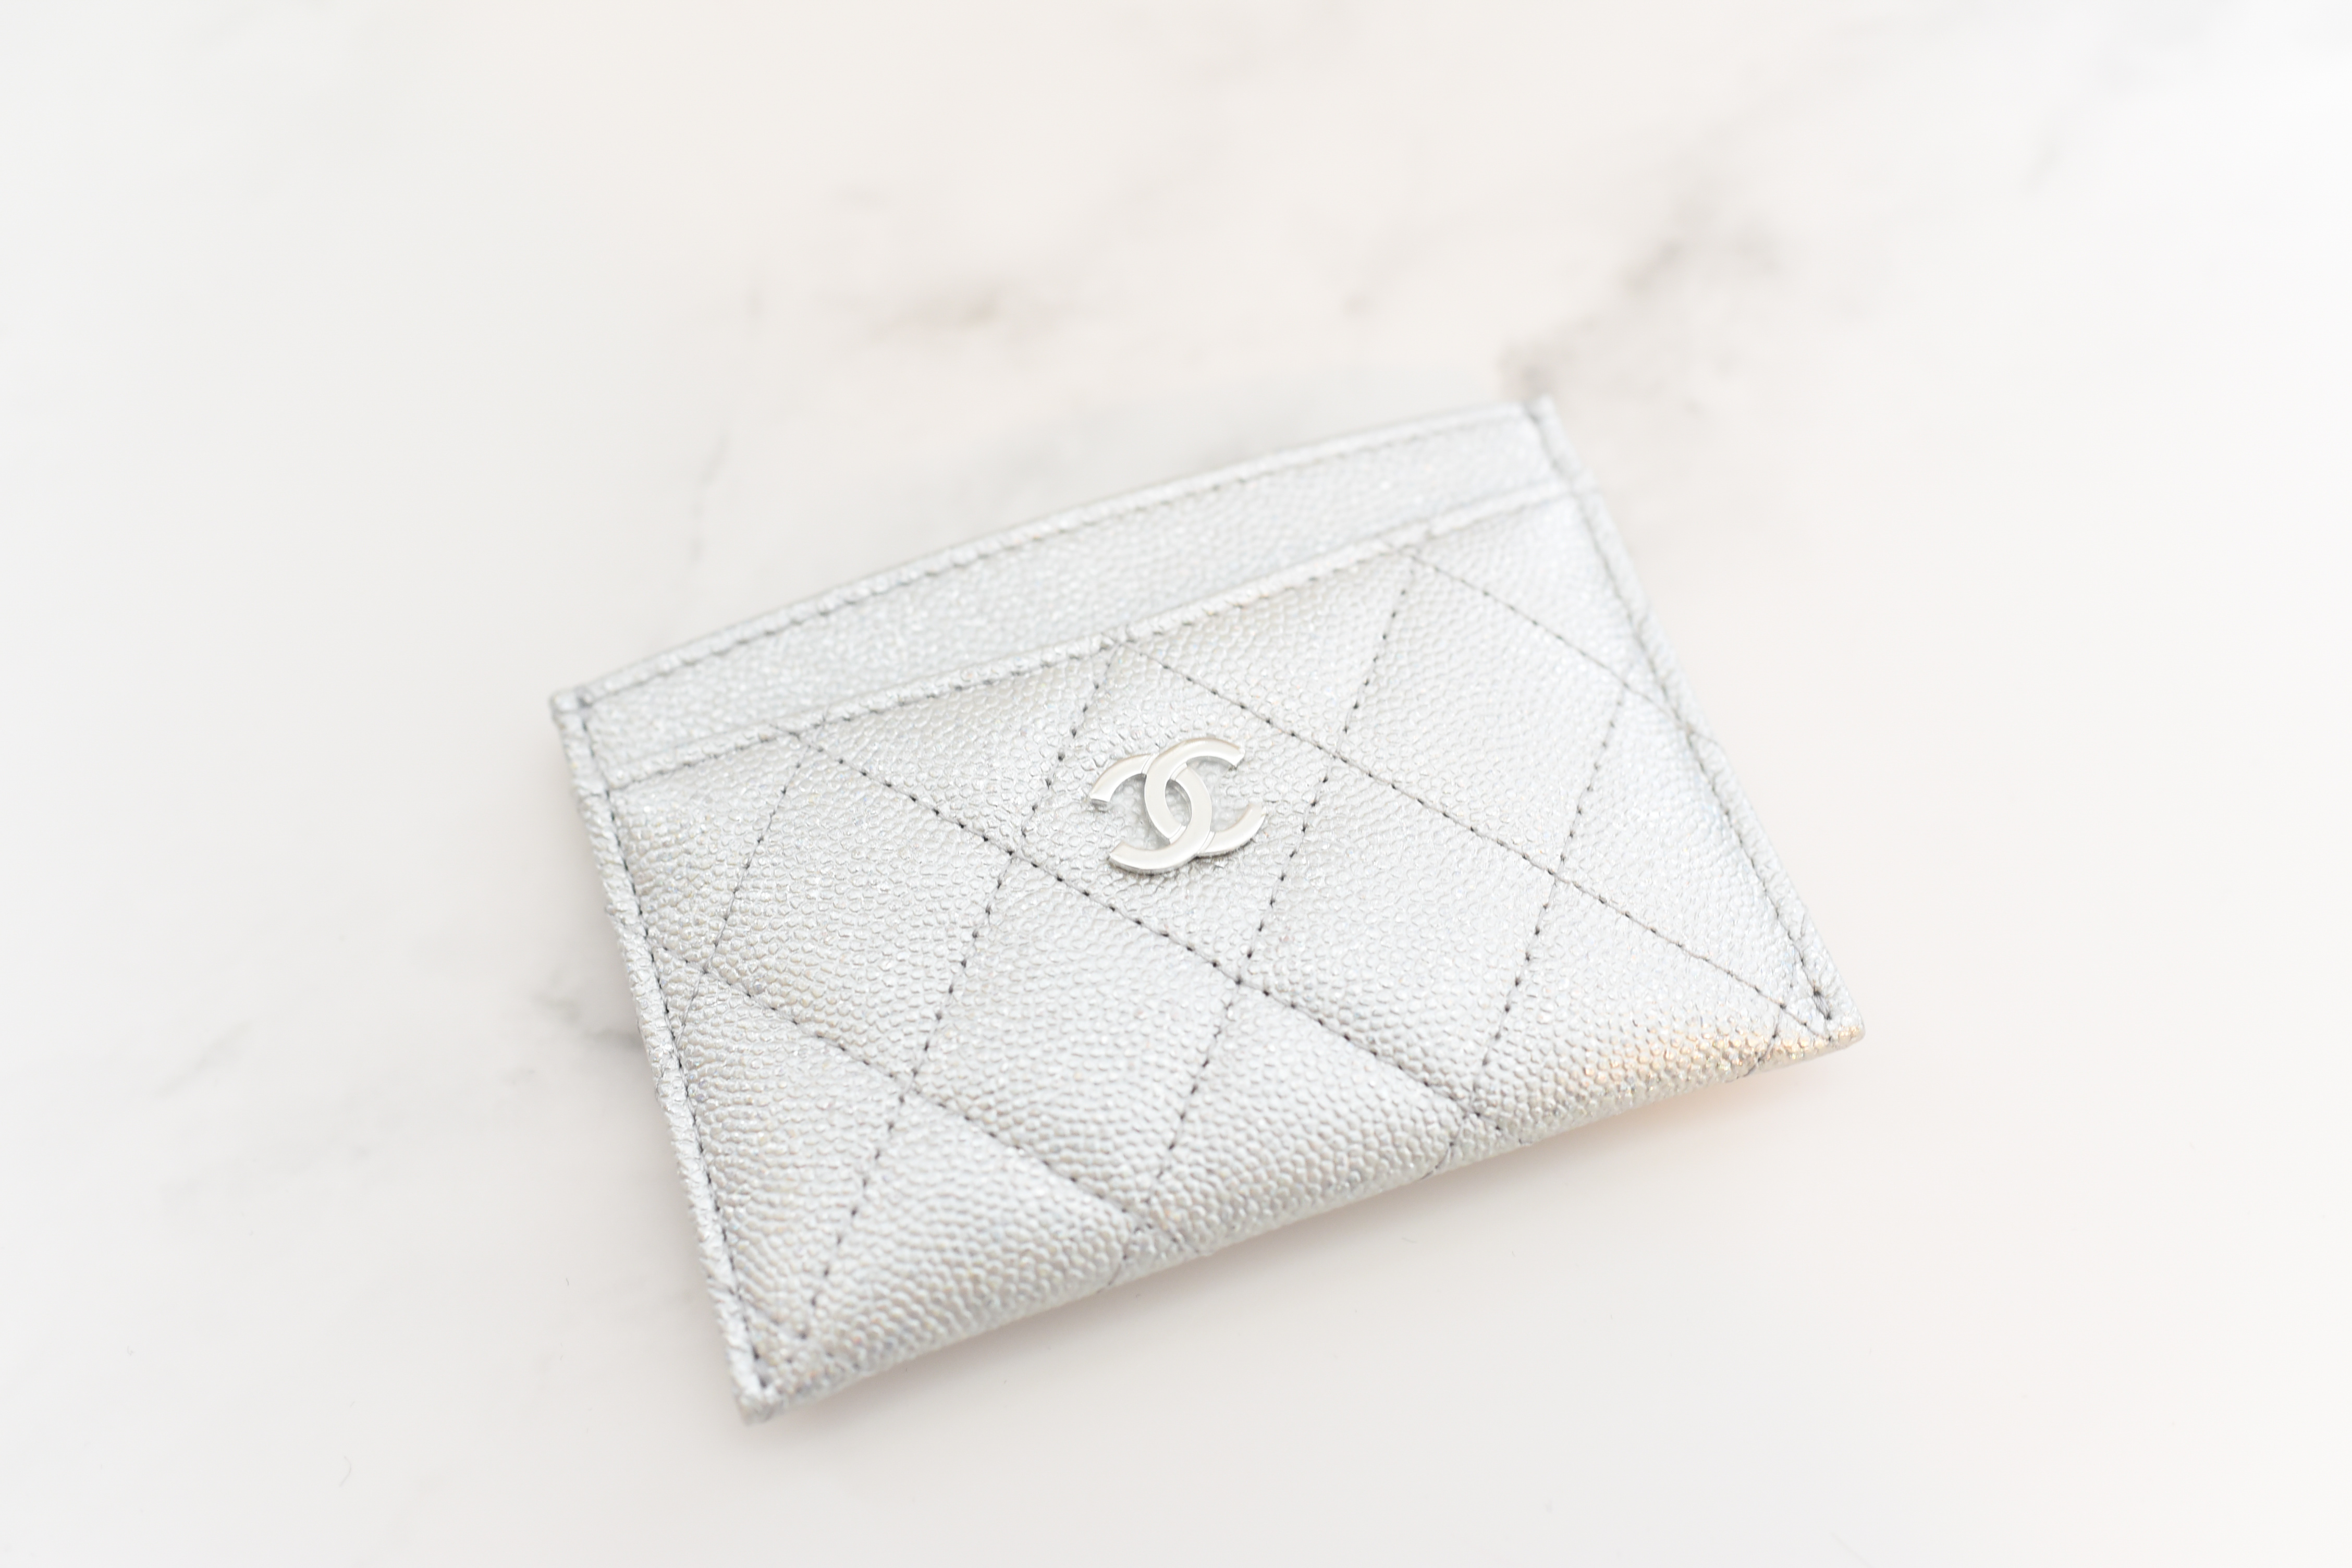 Chanel Teal Silver Hardware Cardholder · INTO